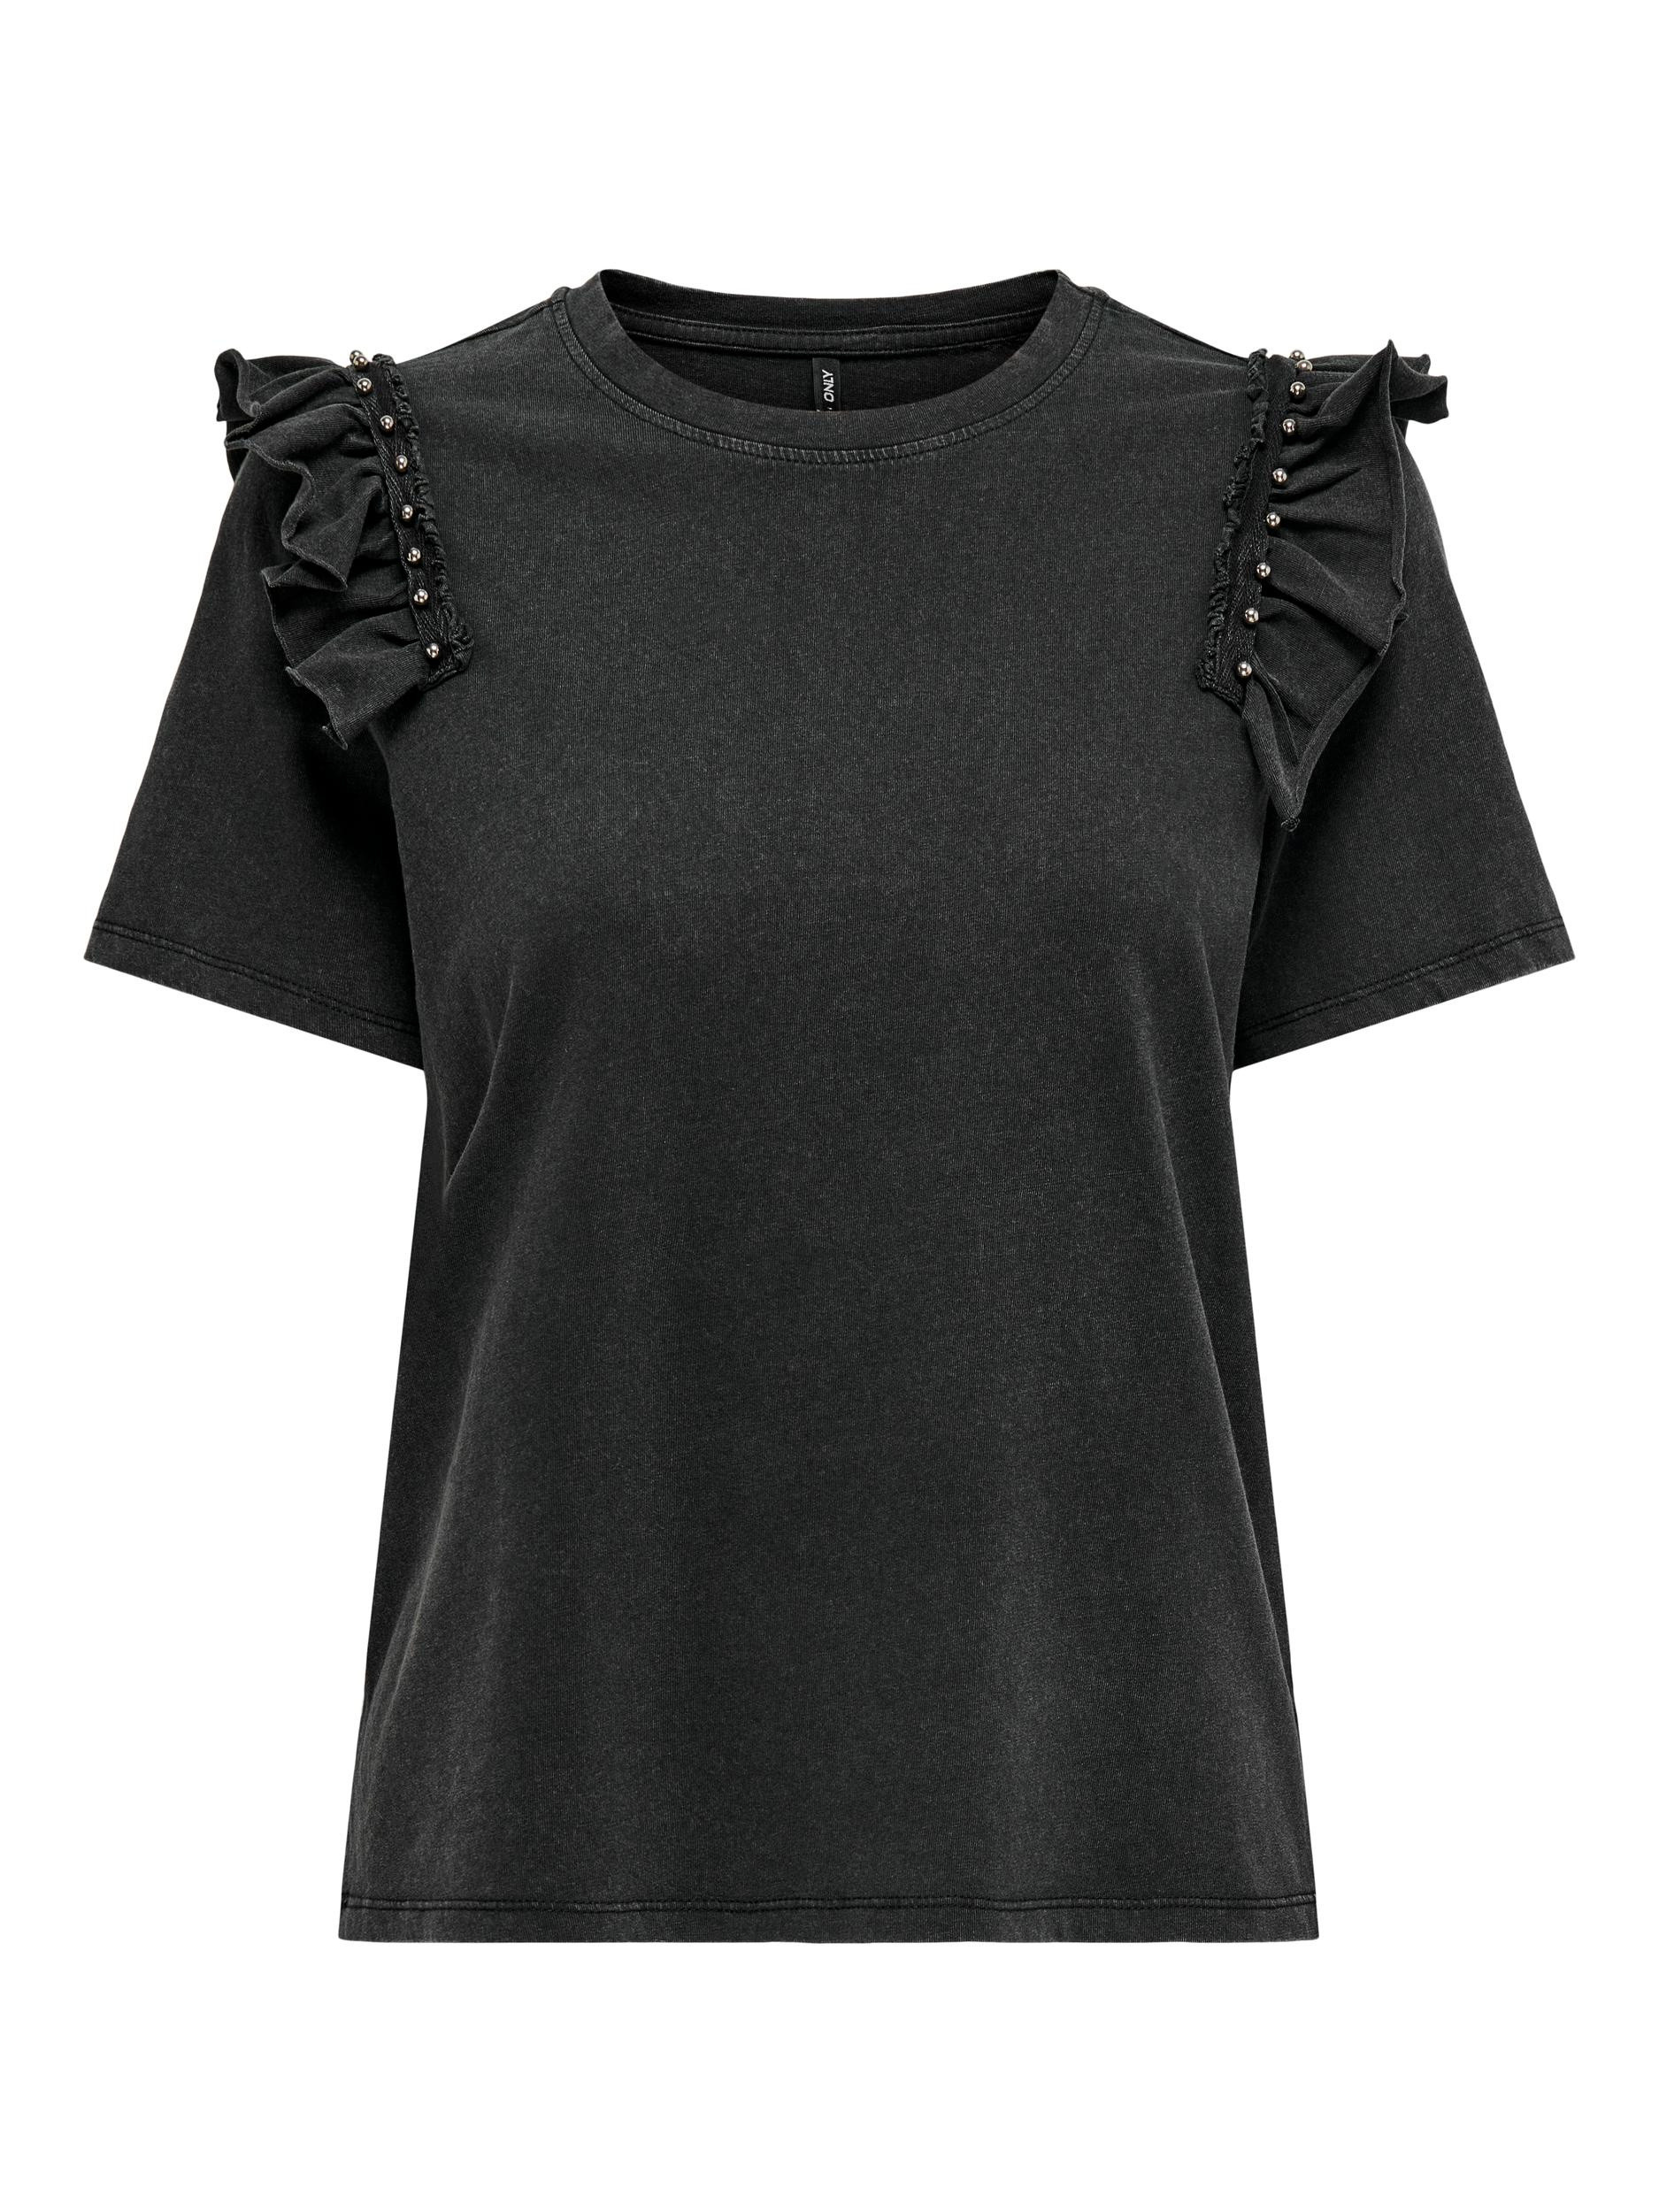 Only - Regular fit cotton T-shirt with ruffles, Black, large image number 0